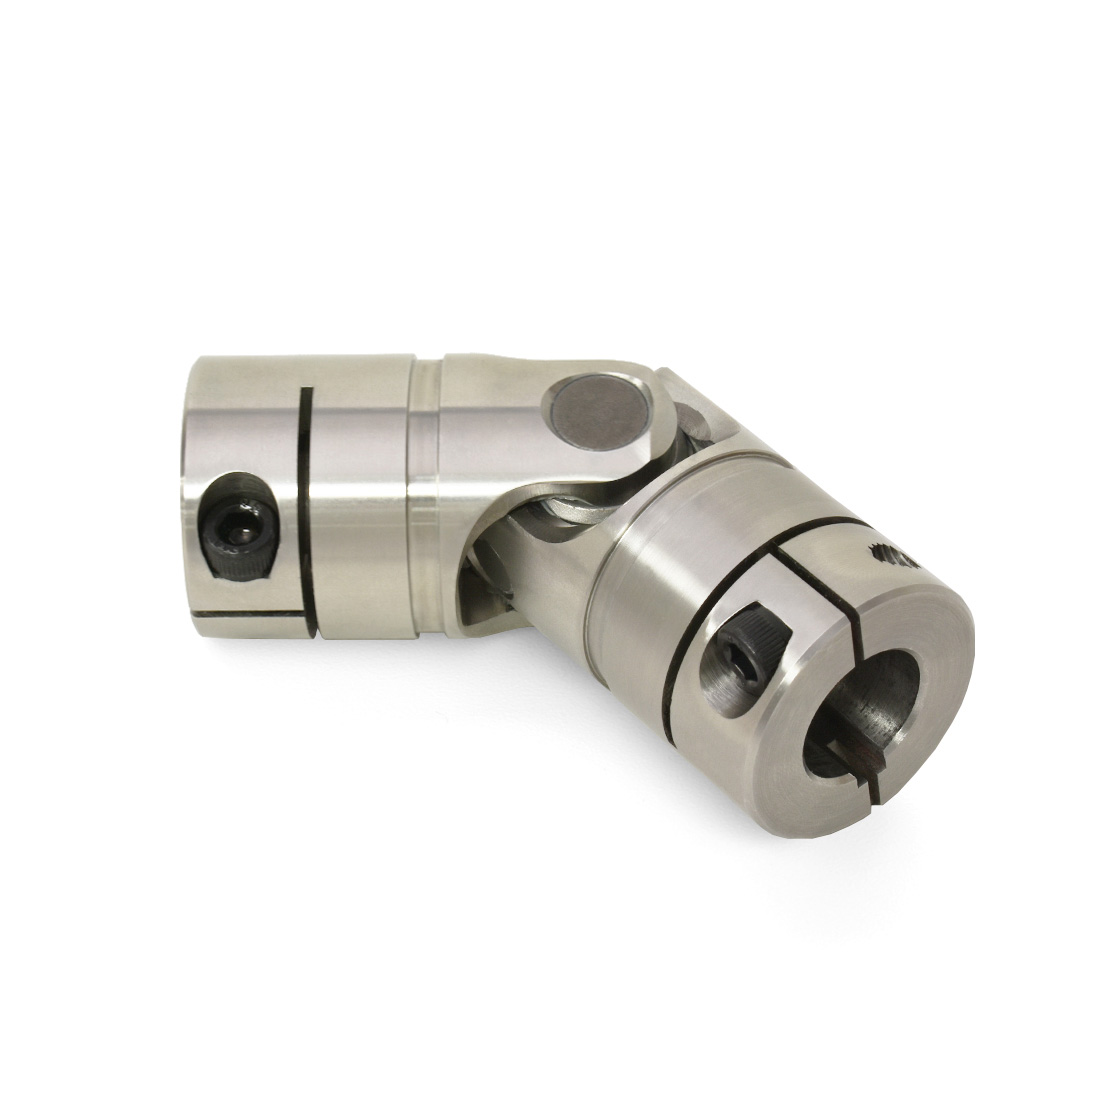 Clamp style universal joints are available in single friction-bearing style with bore sizes from 1/4 inch to 1-1/4 inch in steel for high torque, or stainless steel for improved corrosion resistance